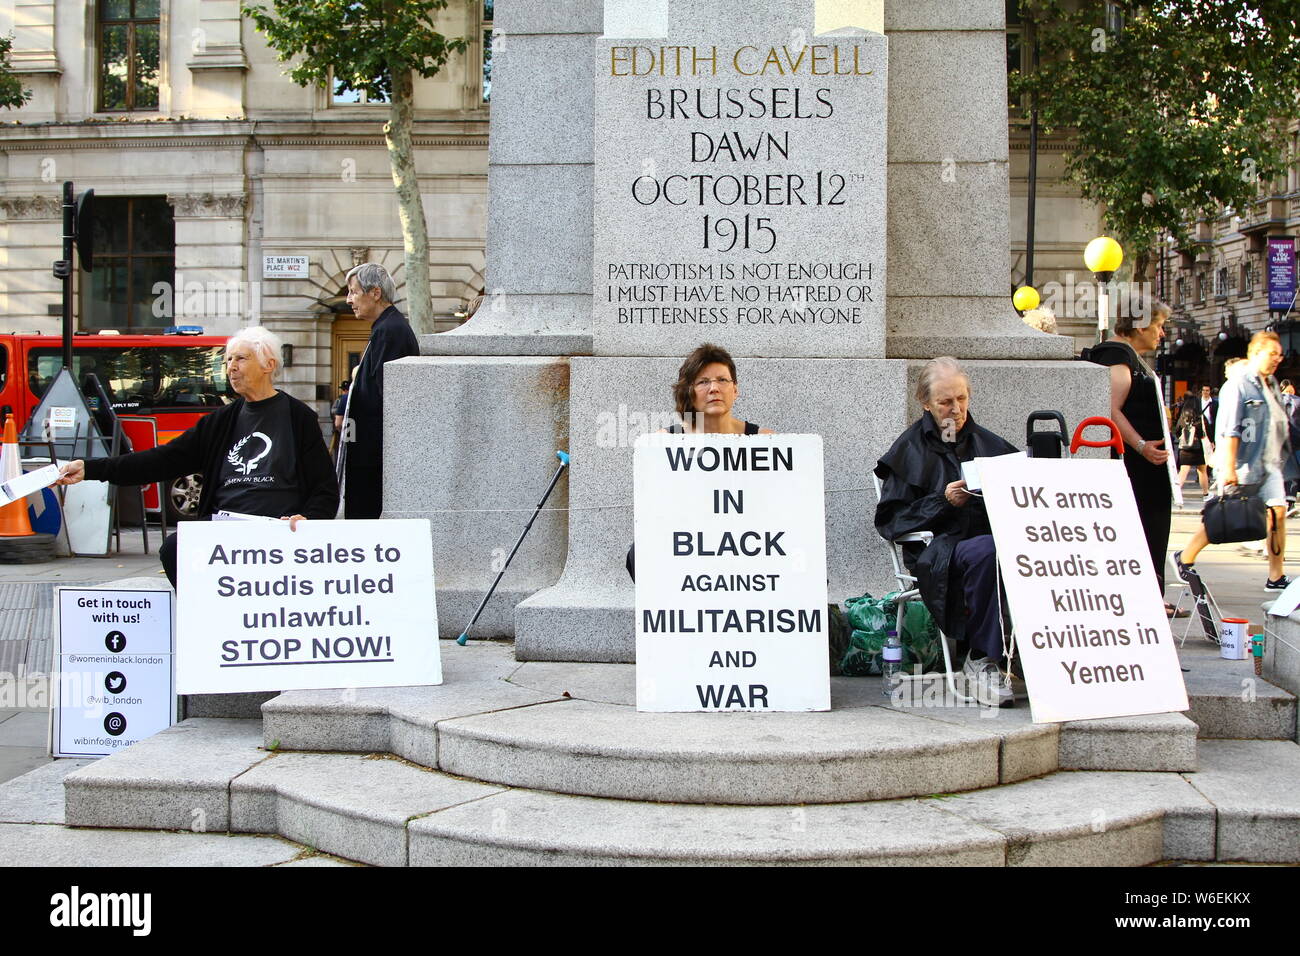 WOMEN IN BLACK AGAINST MILITARISM AND WAR PROTEST AT THE EDITH CAVELL STATUE OF HUMANITY IN SAINT MARTINS PLACE, LONDON, UK ON 31ST JULY 2019. UK ARMS SALES ARE KILLING CIVILIANS IN YEMAN. ARMS SALES TO SAUDI ARABIA RULED UNLAWFUL BY THE COURT OF APPEAL. ENGLISH COURTS. BRITISH COURTS. HUMANITARIAN PROTEST. Stock Photo